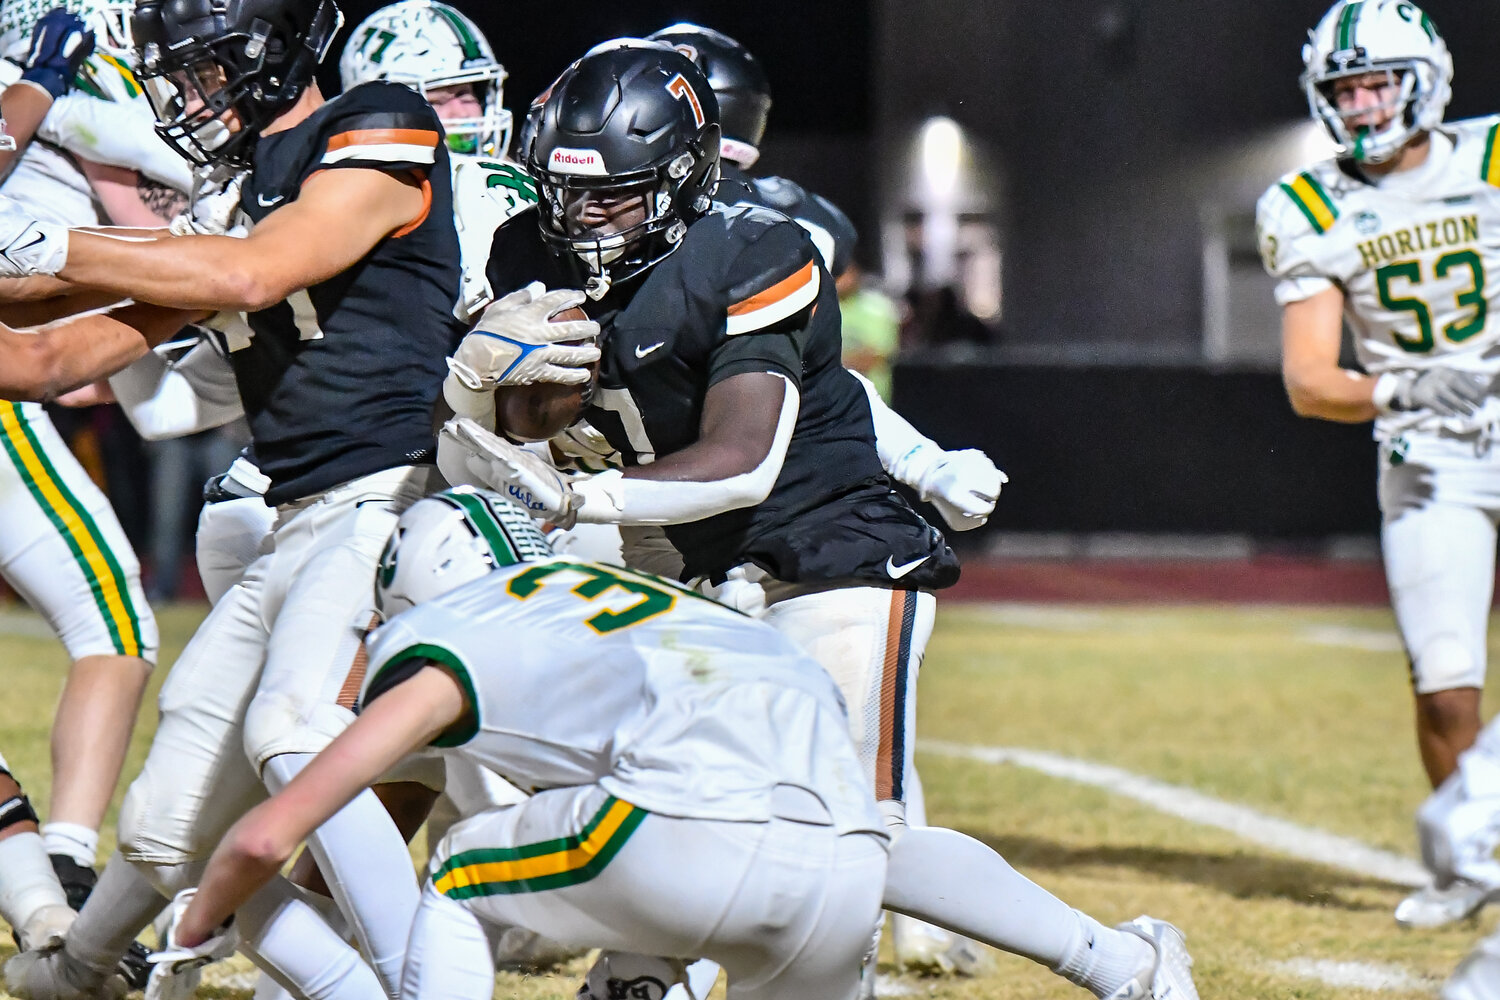 Desert Edge senior running back Markhi McKinnon stiff arms a Horizon defensive player trying to tackle him low during a 5A football semifinal Nov. 24 in Goodyear.